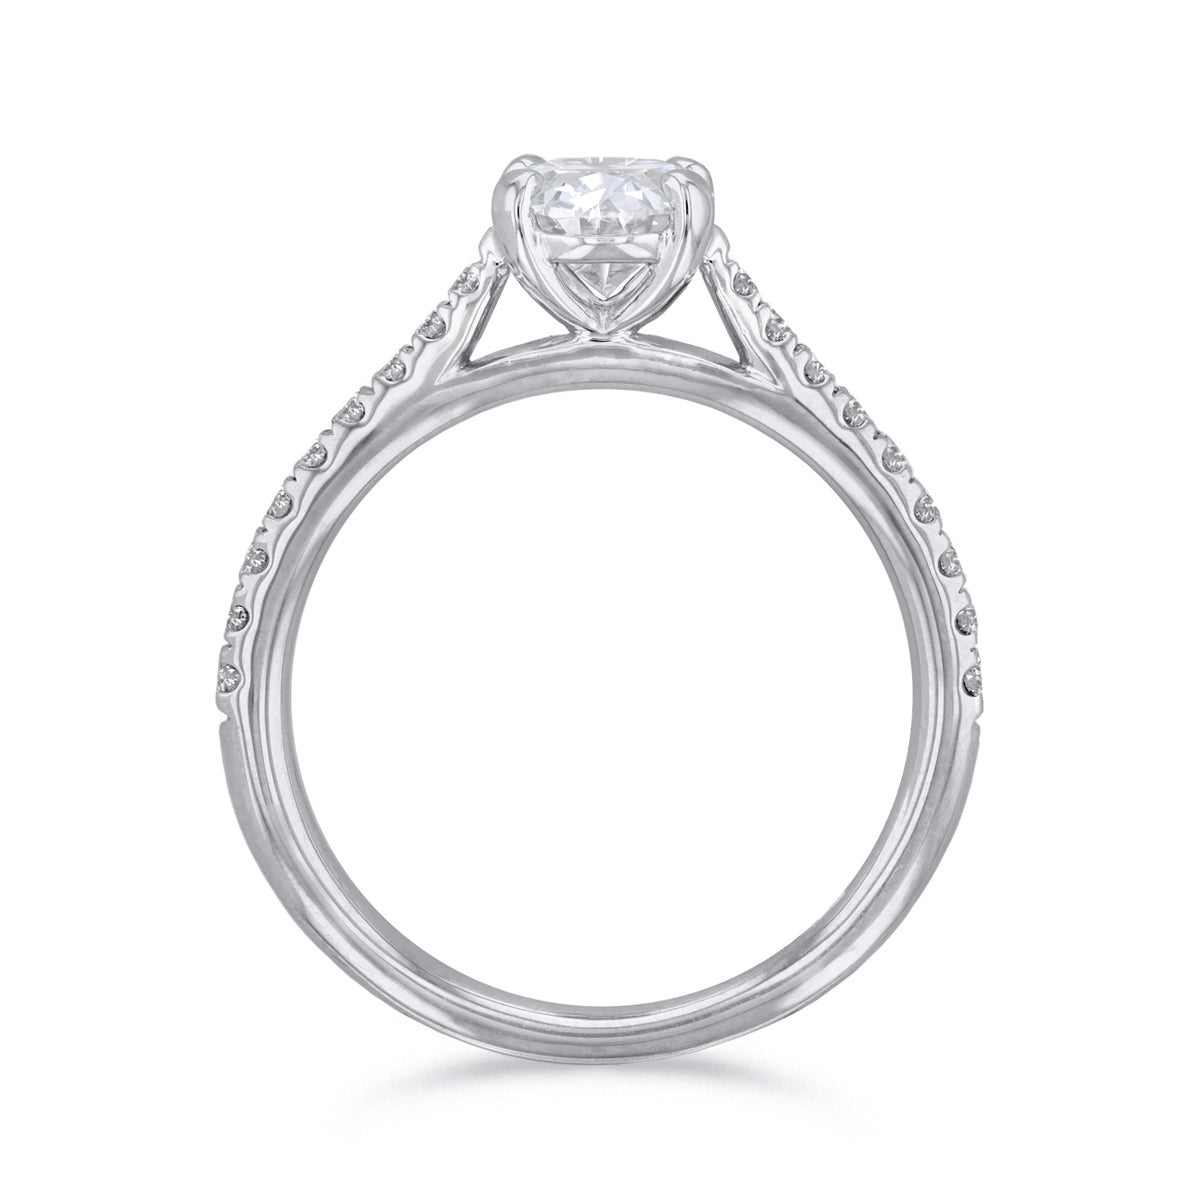 1-50ct-ophelia-shoulder-set-oval-cut-solitaire-diamond-engagement-ring-18ct-white-gold